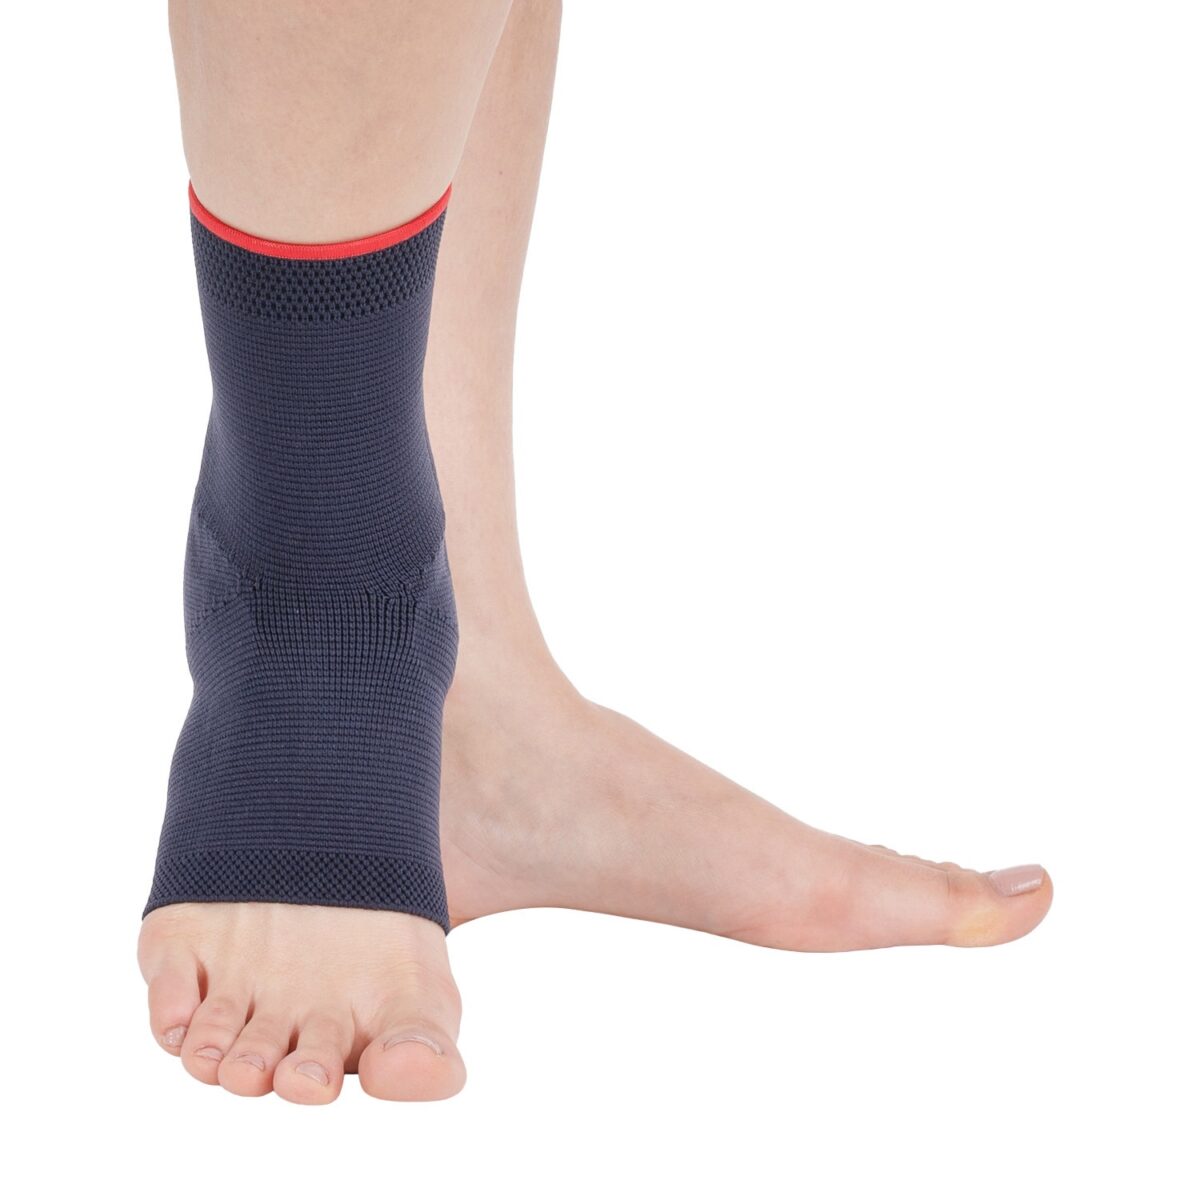 wingmed orthopedic equipments W604 woven malleol ankle support 14 2